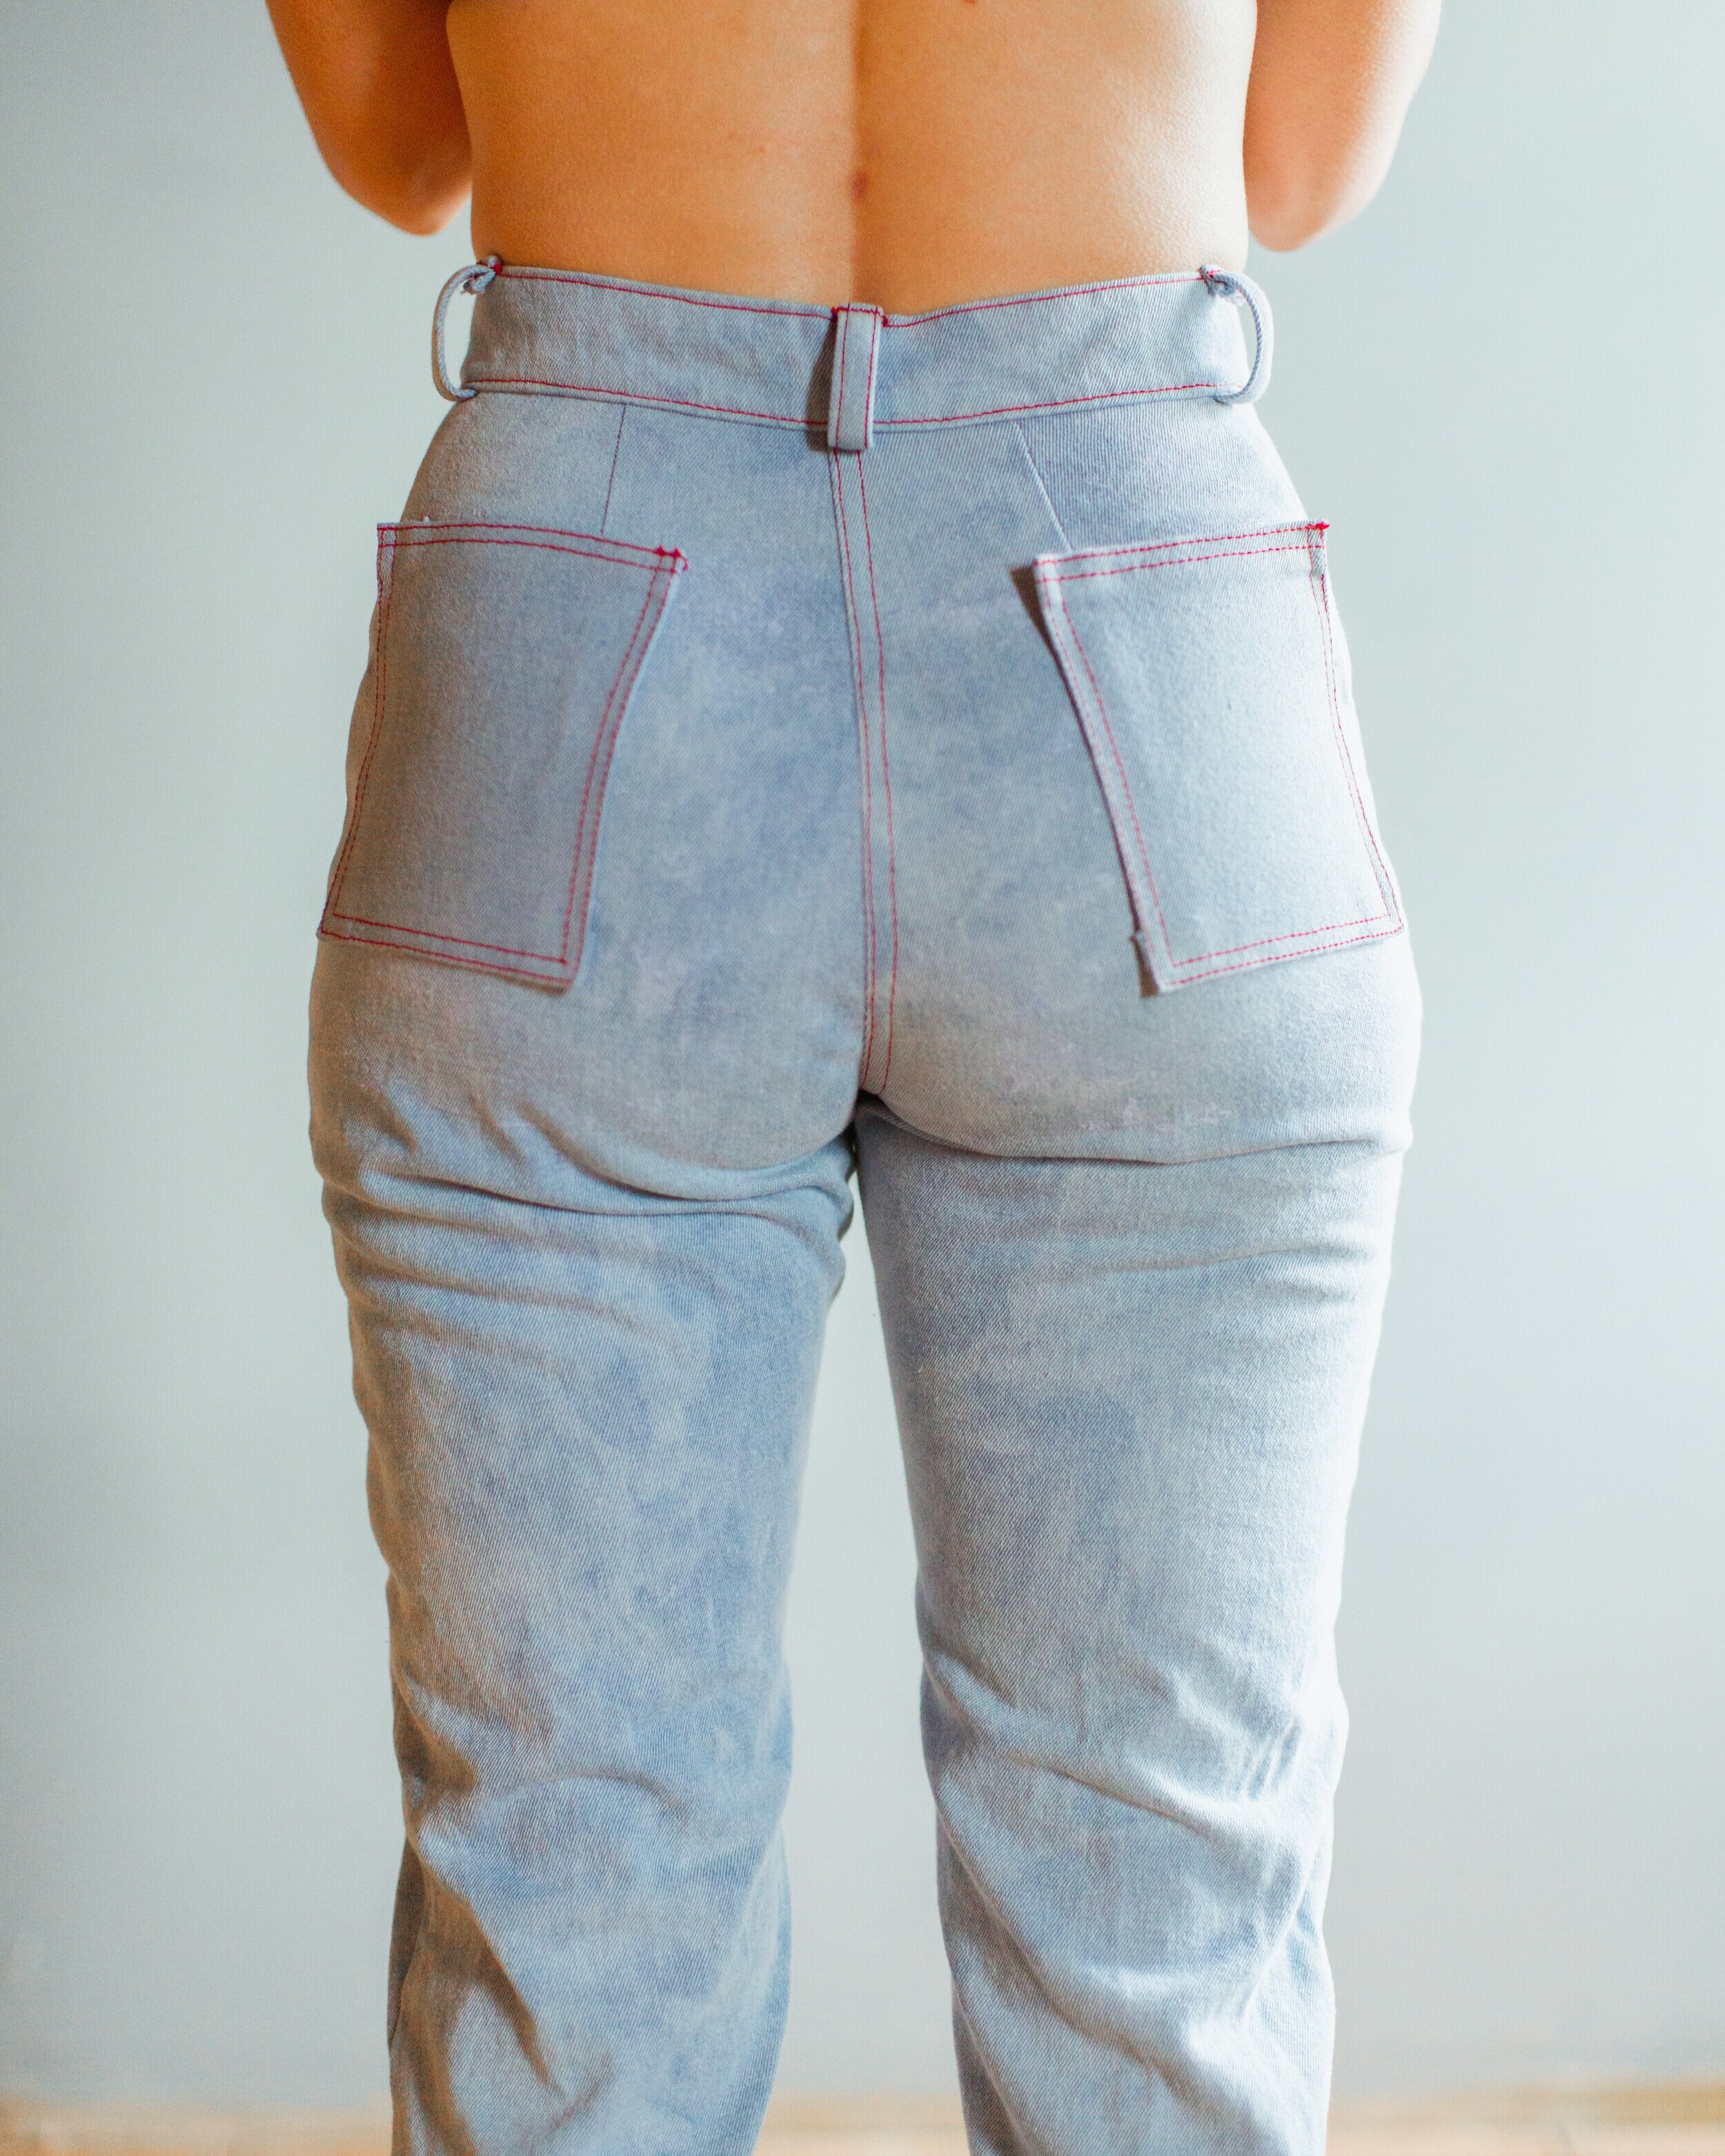 Pocket Placement Really Does Make a Difference on How Your Bum Looks —  SARAH KIRSTEN